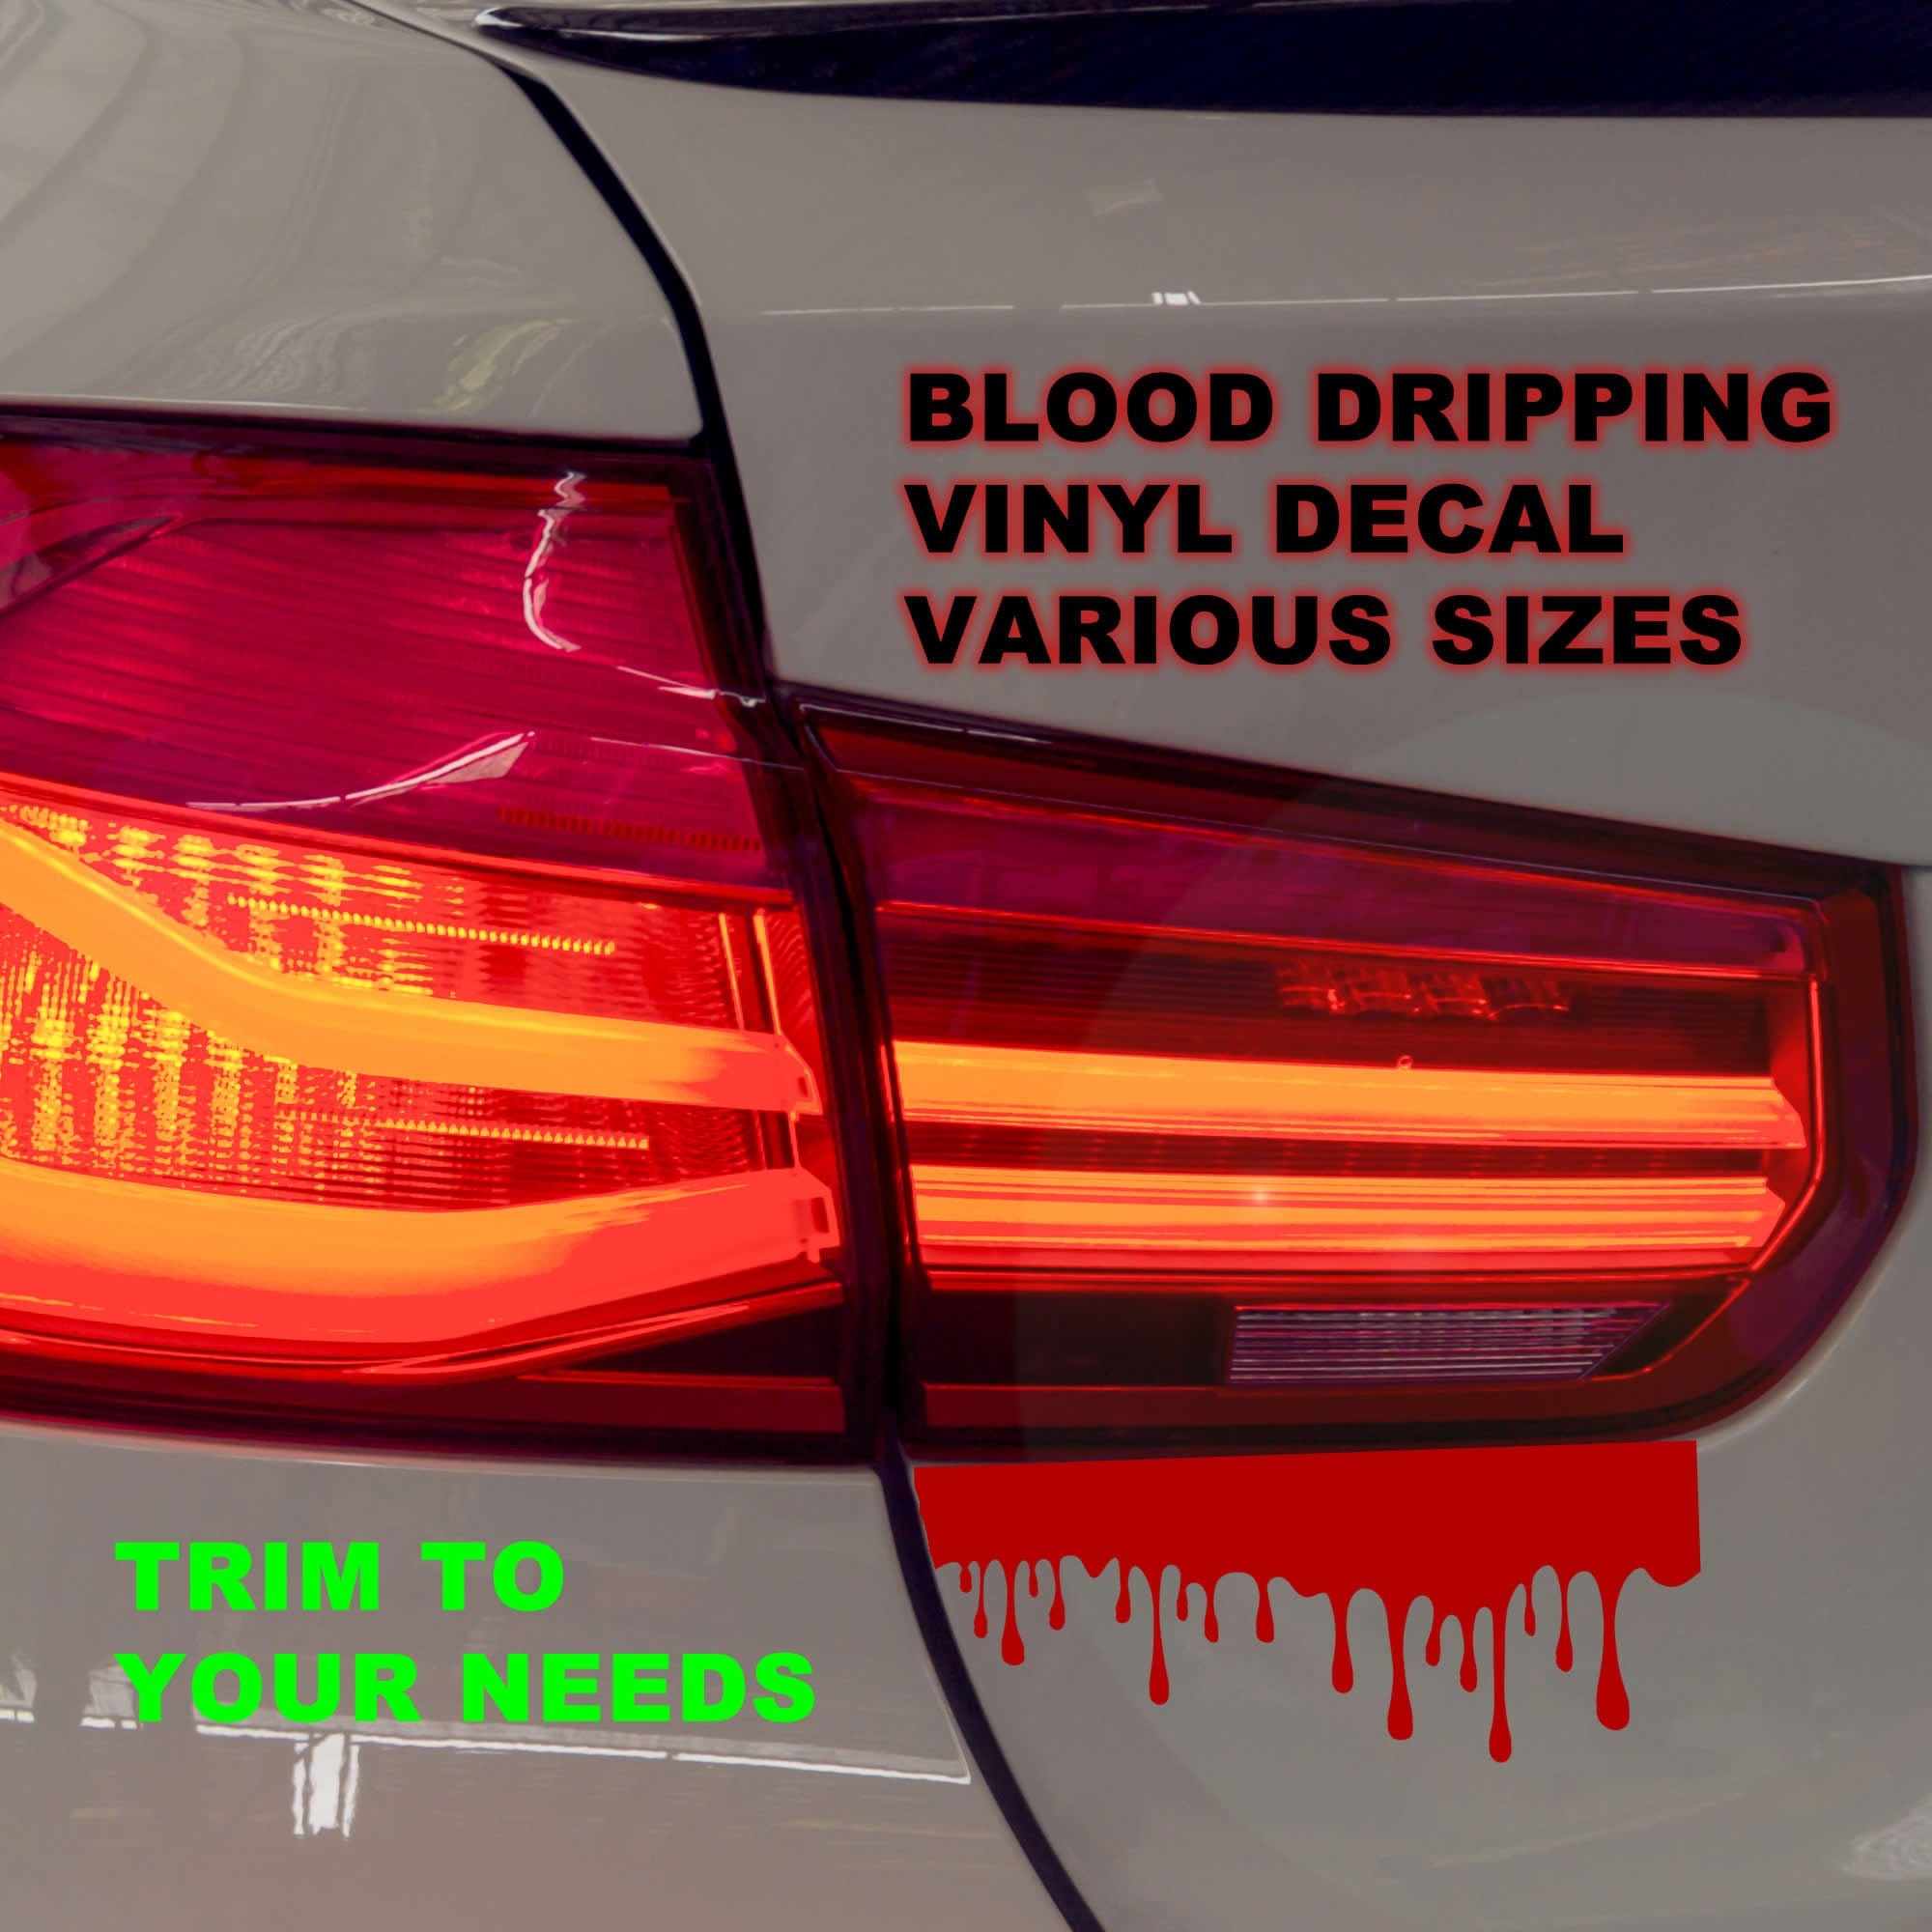 Blood Dripping Vinyl Decal - Premium vinyl decal in various sizes up to 24